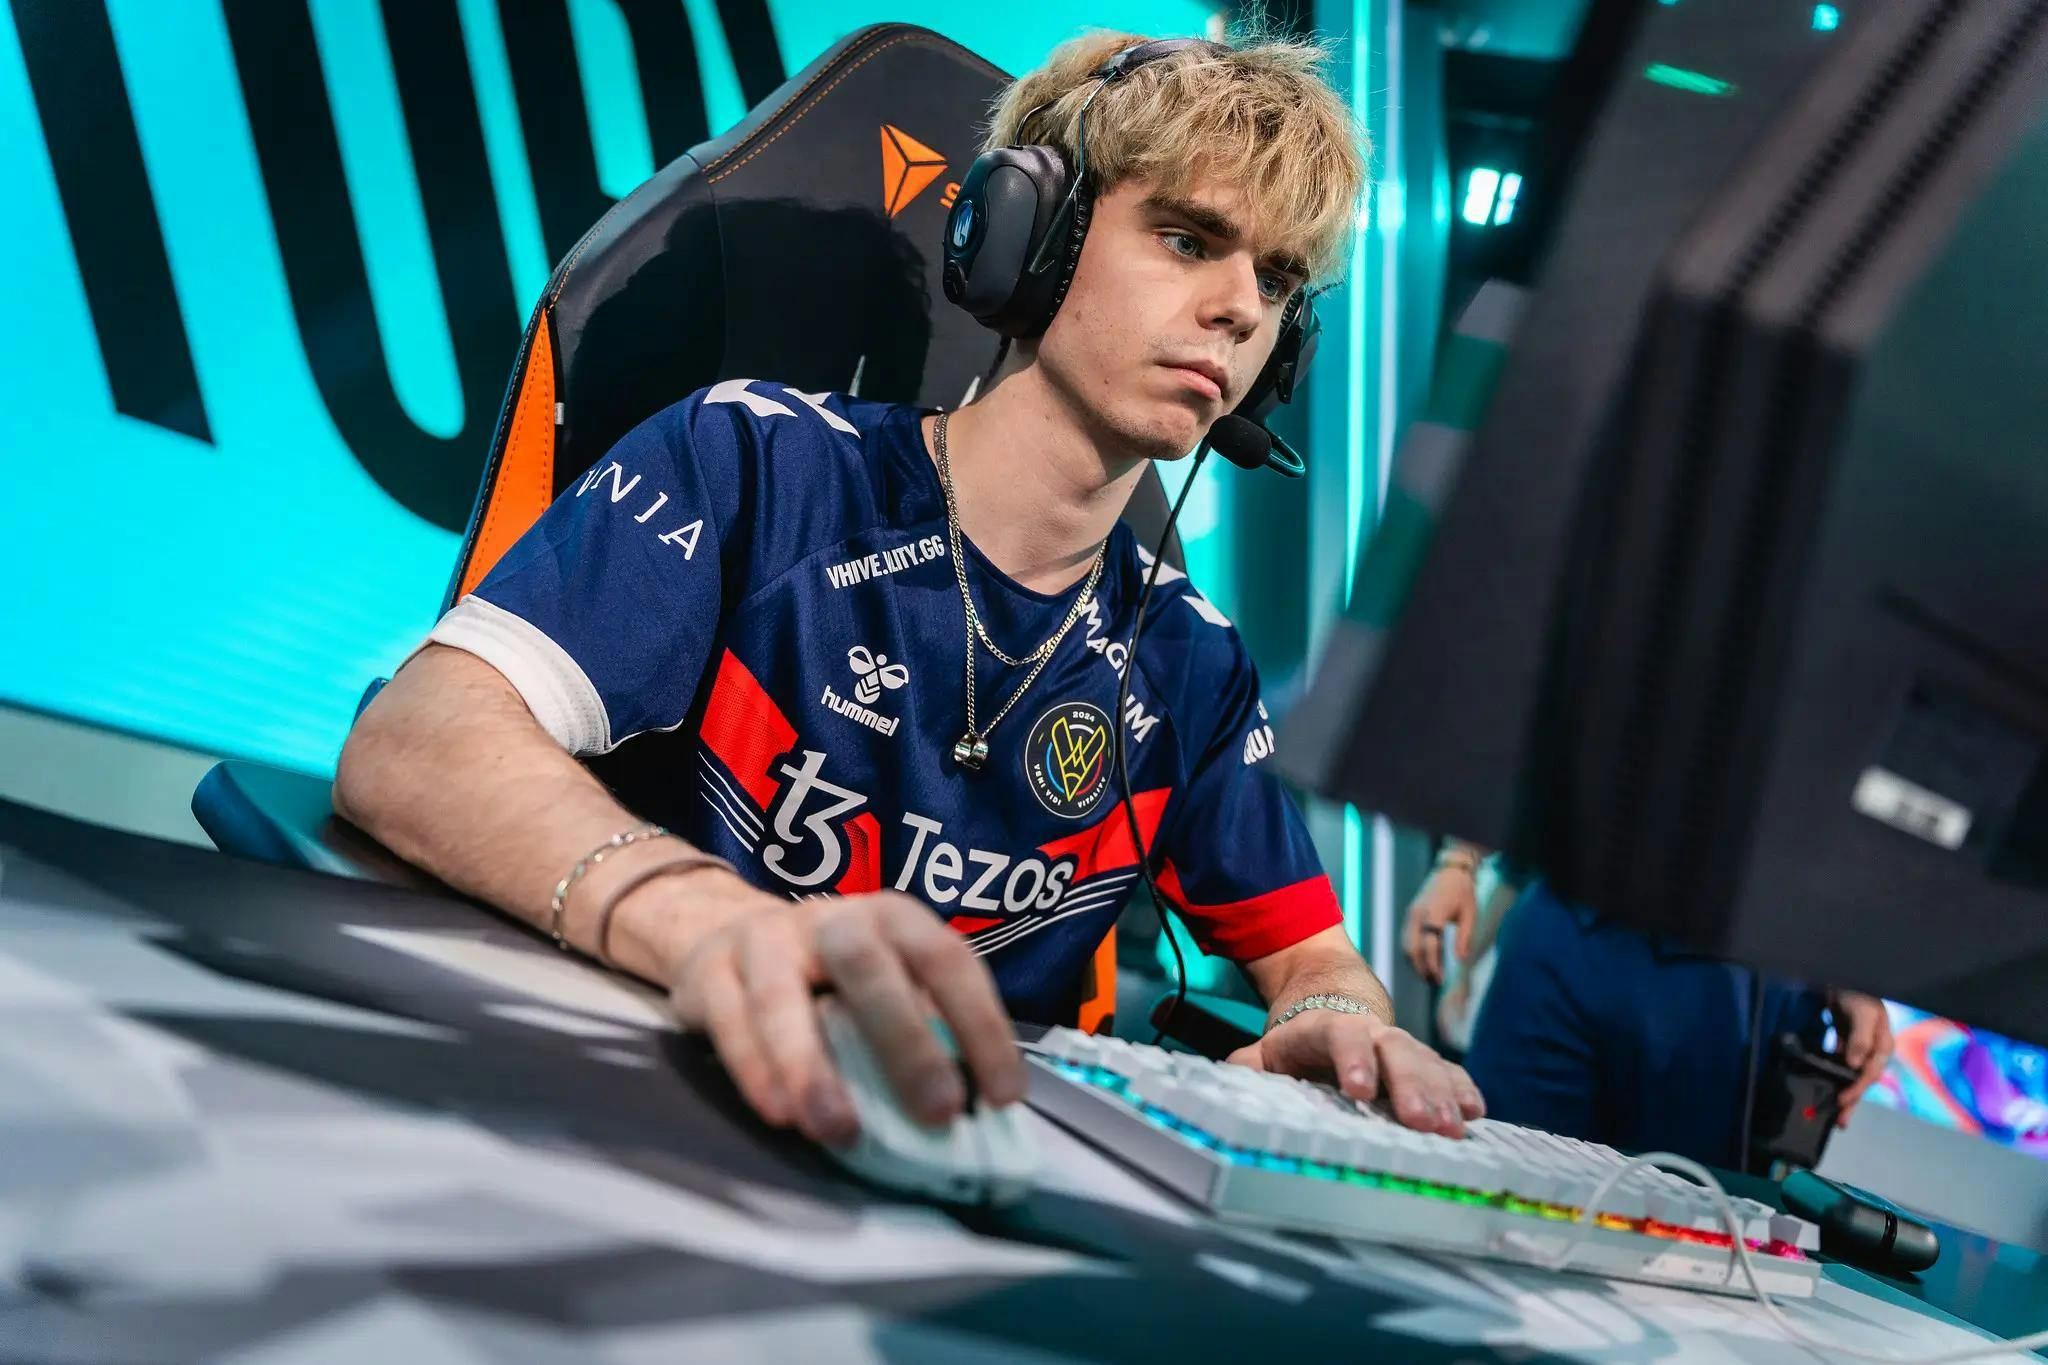 Vetheo, competing on the LEC stage during Week 3. Credit: Wojciech Wandzel/Riot Games